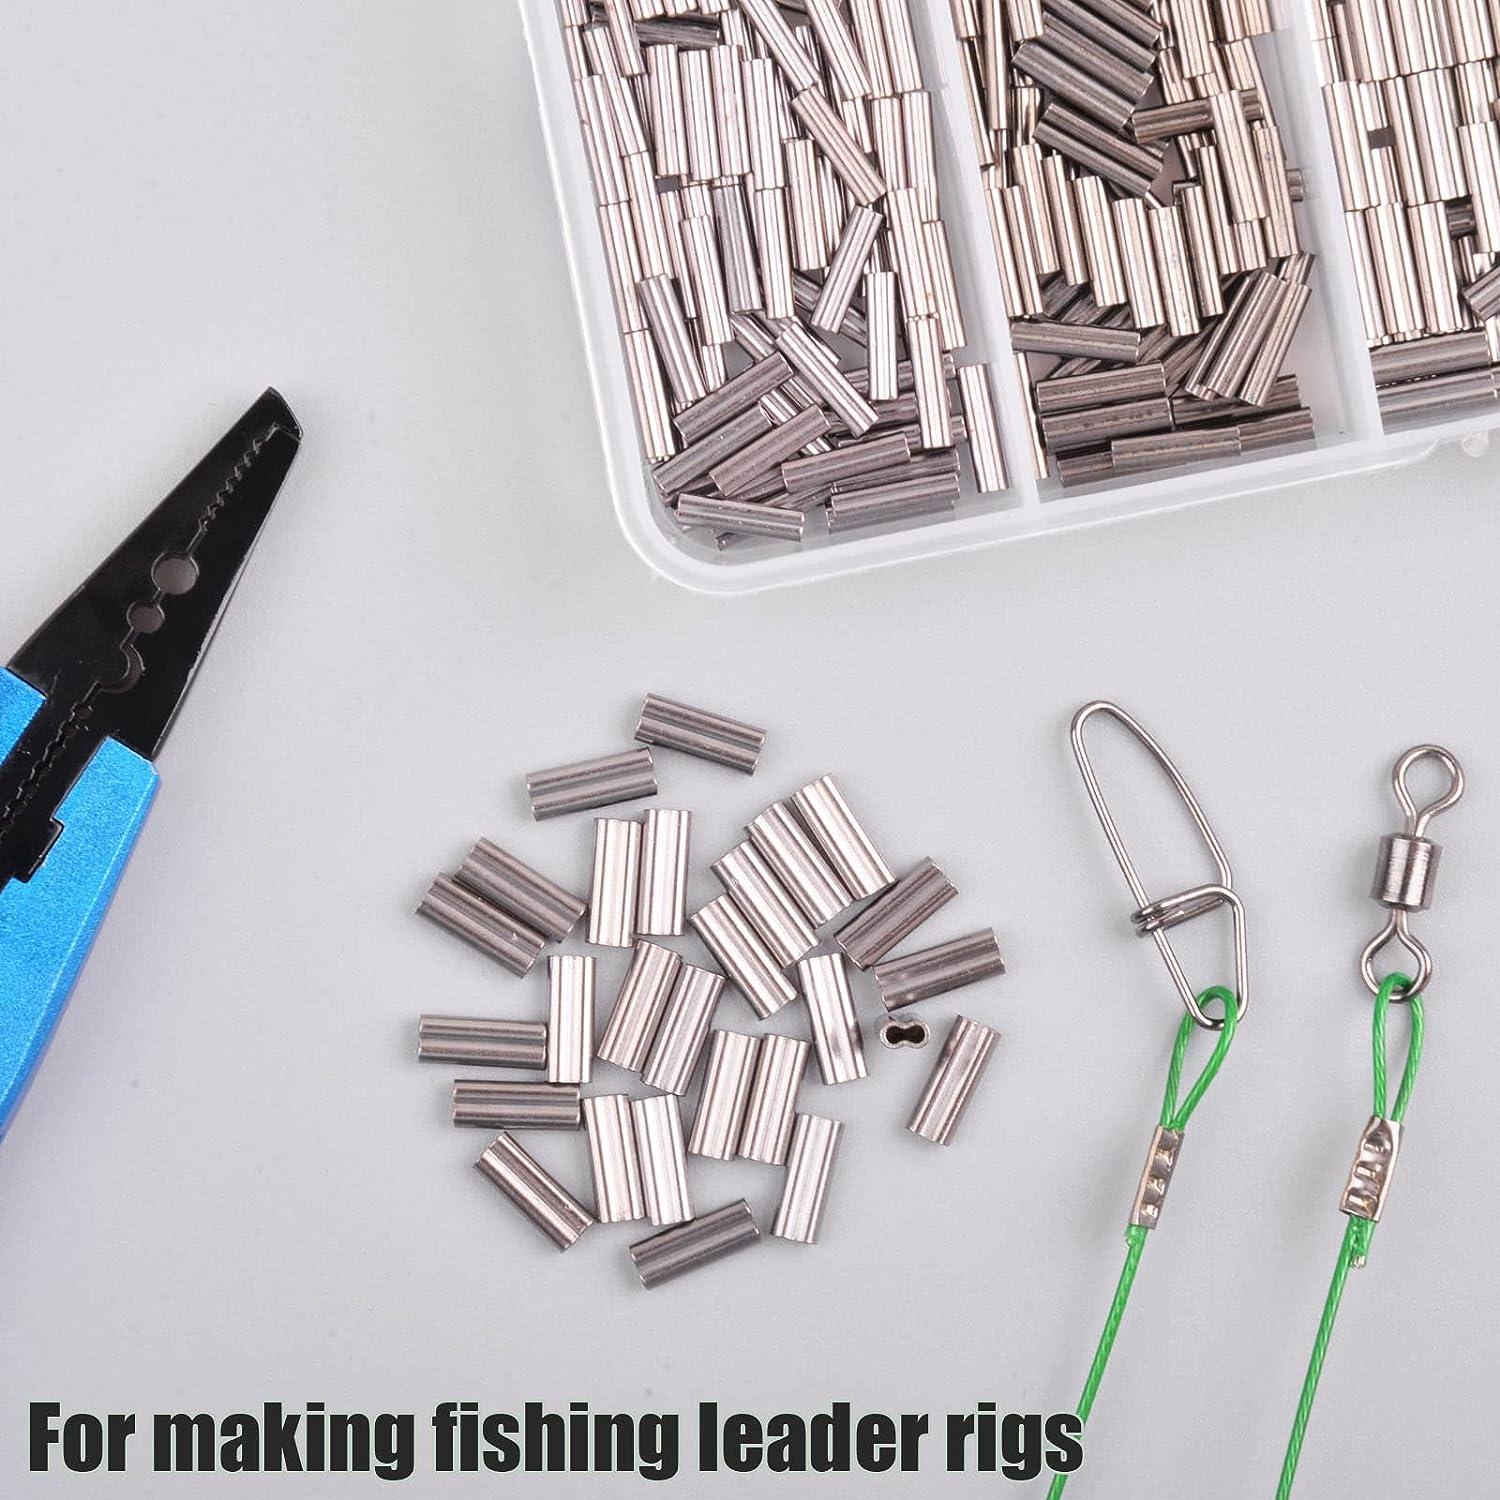 500pcs Fishing Crimp Sleeves Kit, Double Barrel Crimp Sleeves Brass Copper  Crimping Sleeve Tubes Fishing Line Connector Fishing Wire Leader Rigging  Tackle